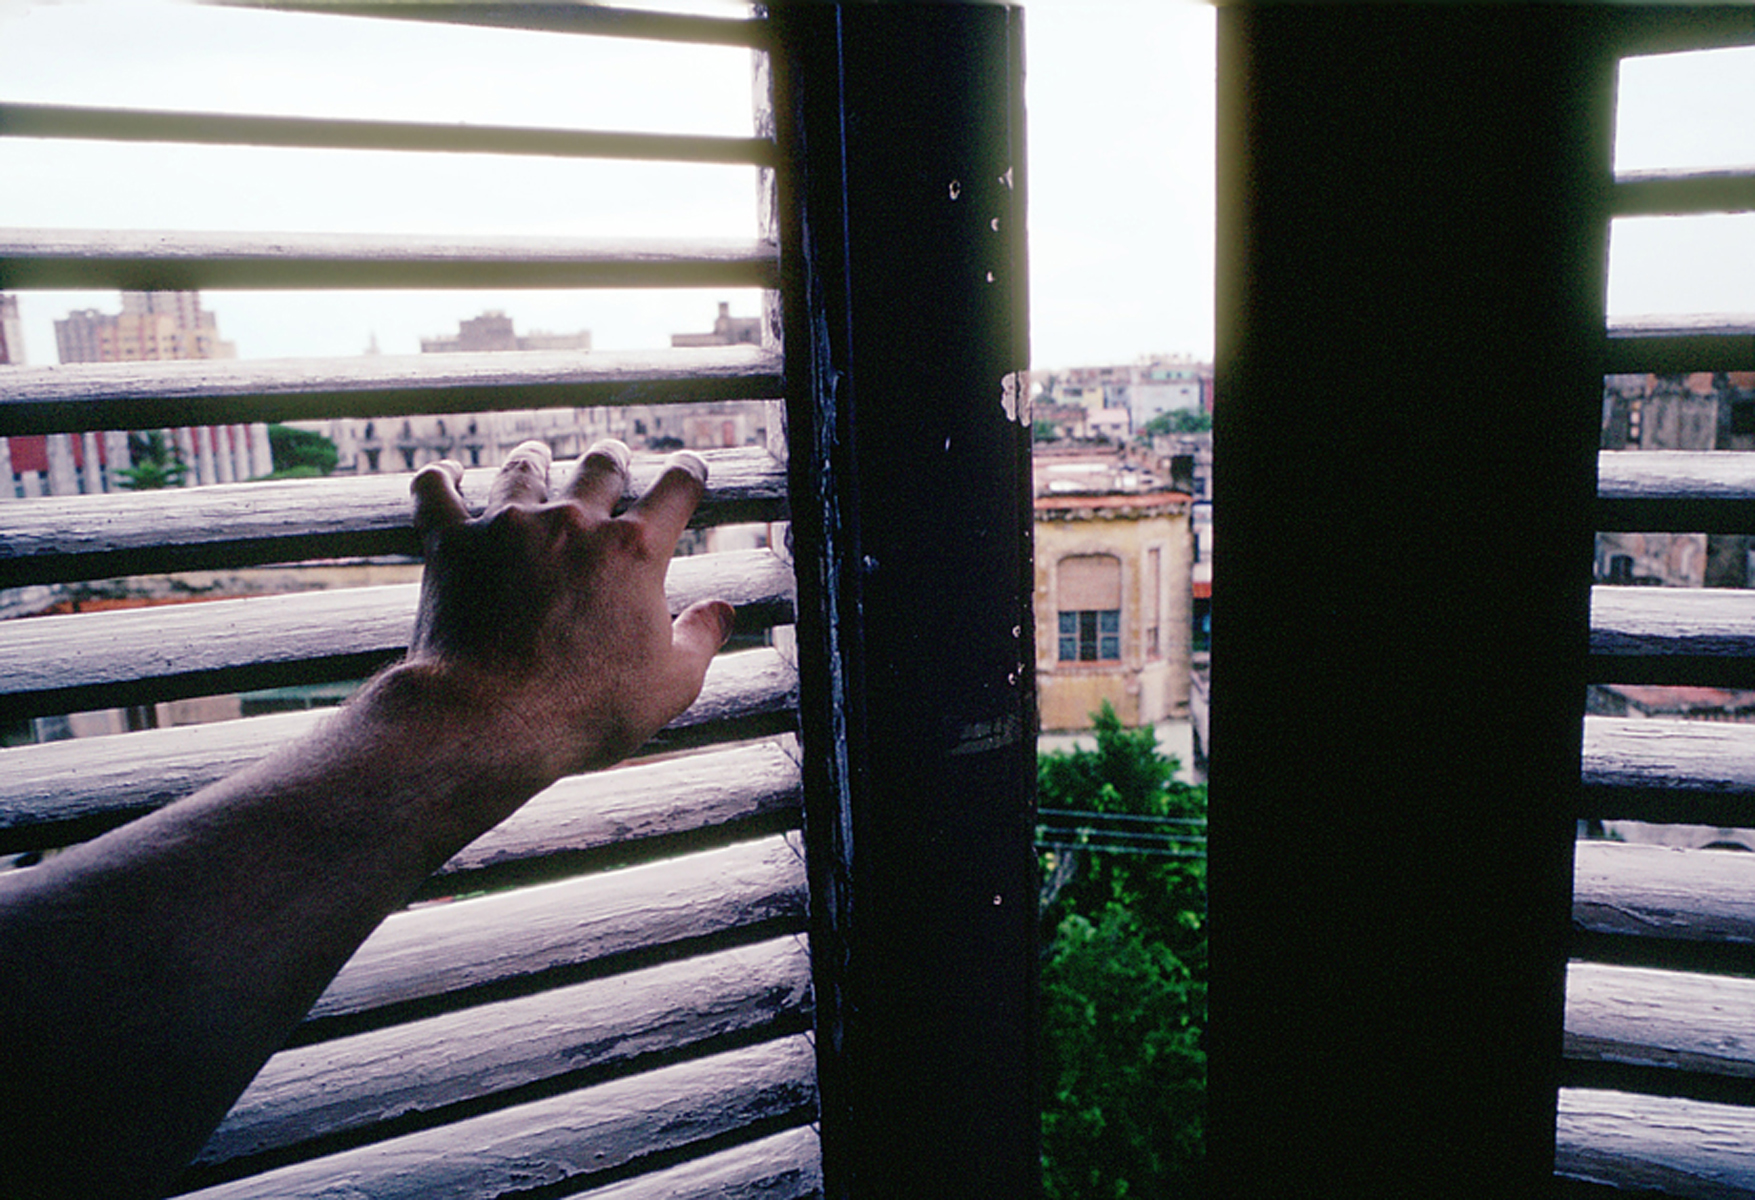 Often confined to a box of silent voices, whispers abound, as sentiment for the revolution dissipates, as if it were rain falling into the Caribbean. What can we do, but open our eyes and look beyond our window shades, beyond the iconic images of what has been left behind of our revolution, passed the horizon where we dream. Havana, Cuba